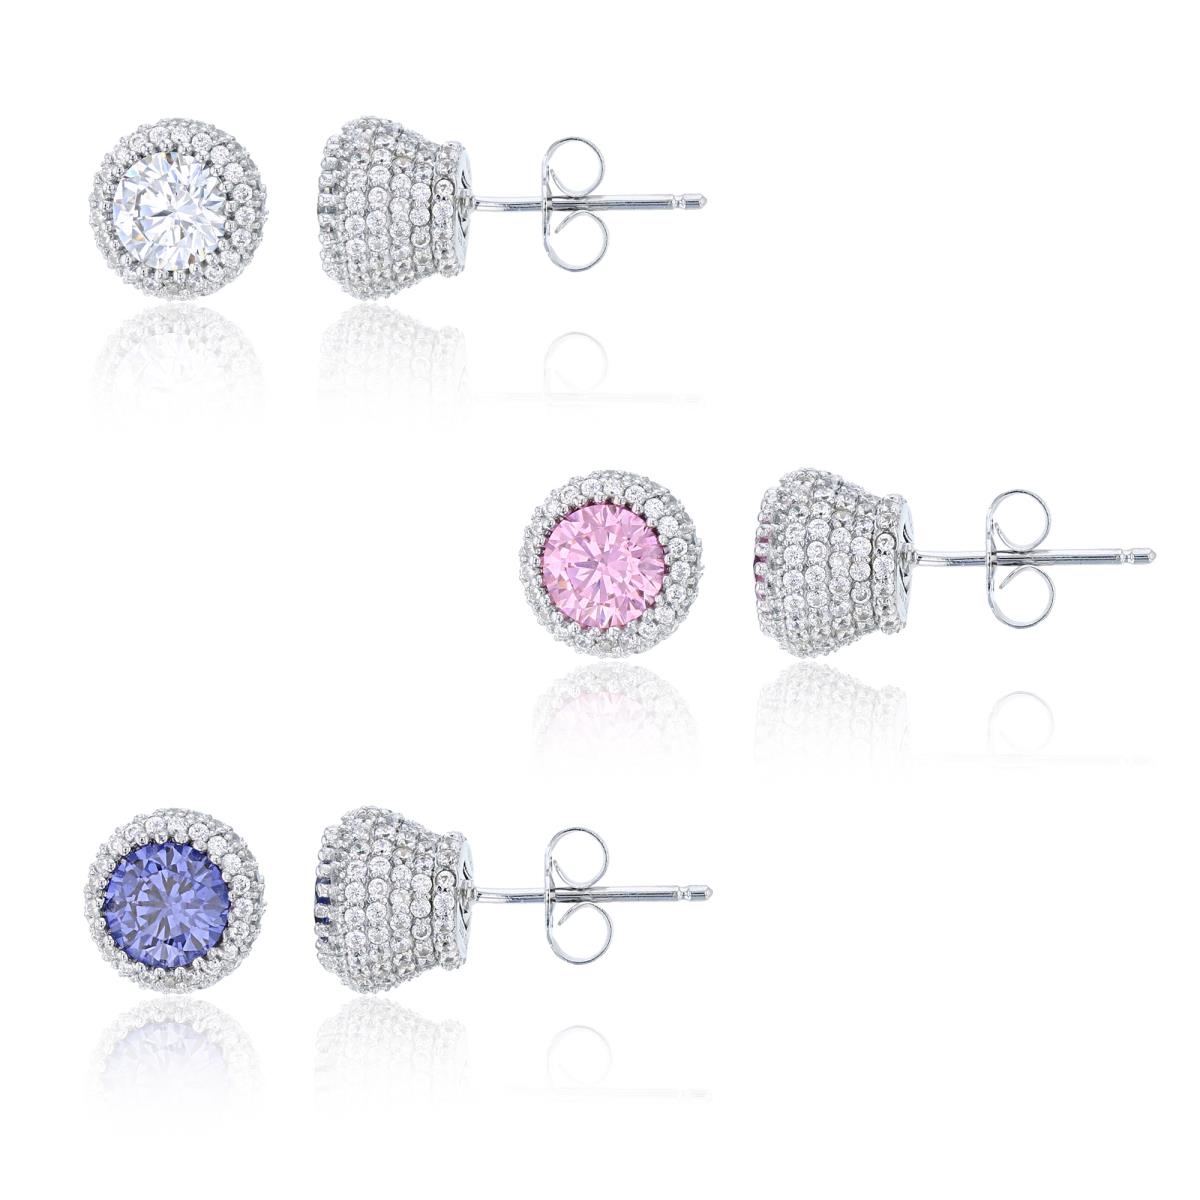 Sterling Silver Rhodium 6mm White, Pink & Tanzanite Round Cut CZ Micropave Stud Earrings Set